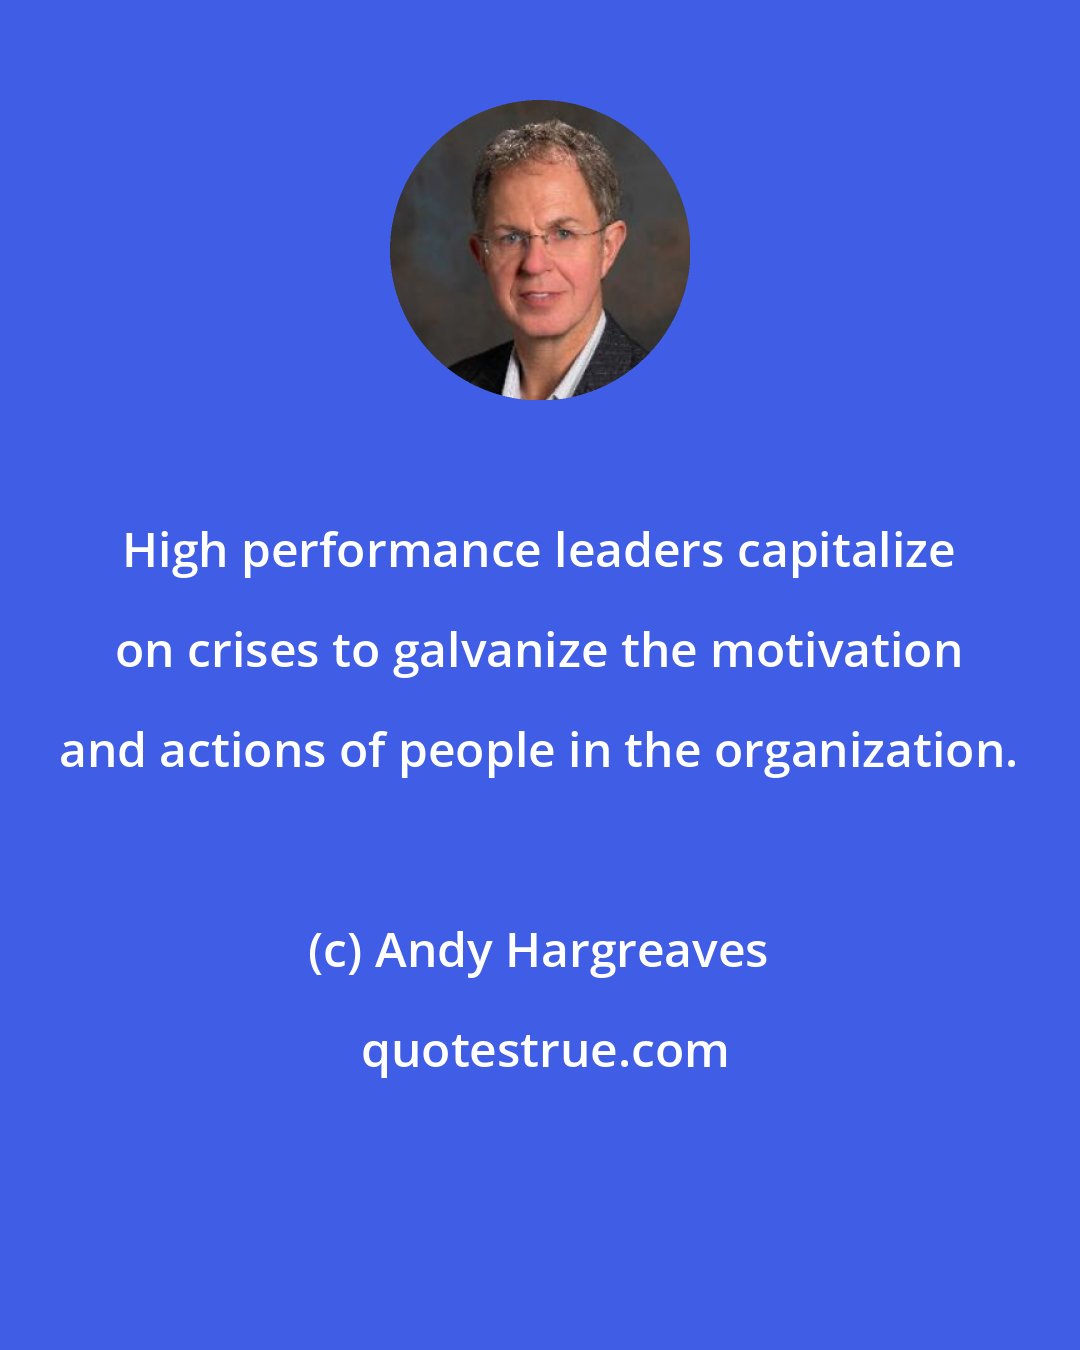 Andy Hargreaves: High performance leaders capitalize on crises to galvanize the motivation and actions of people in the organization.